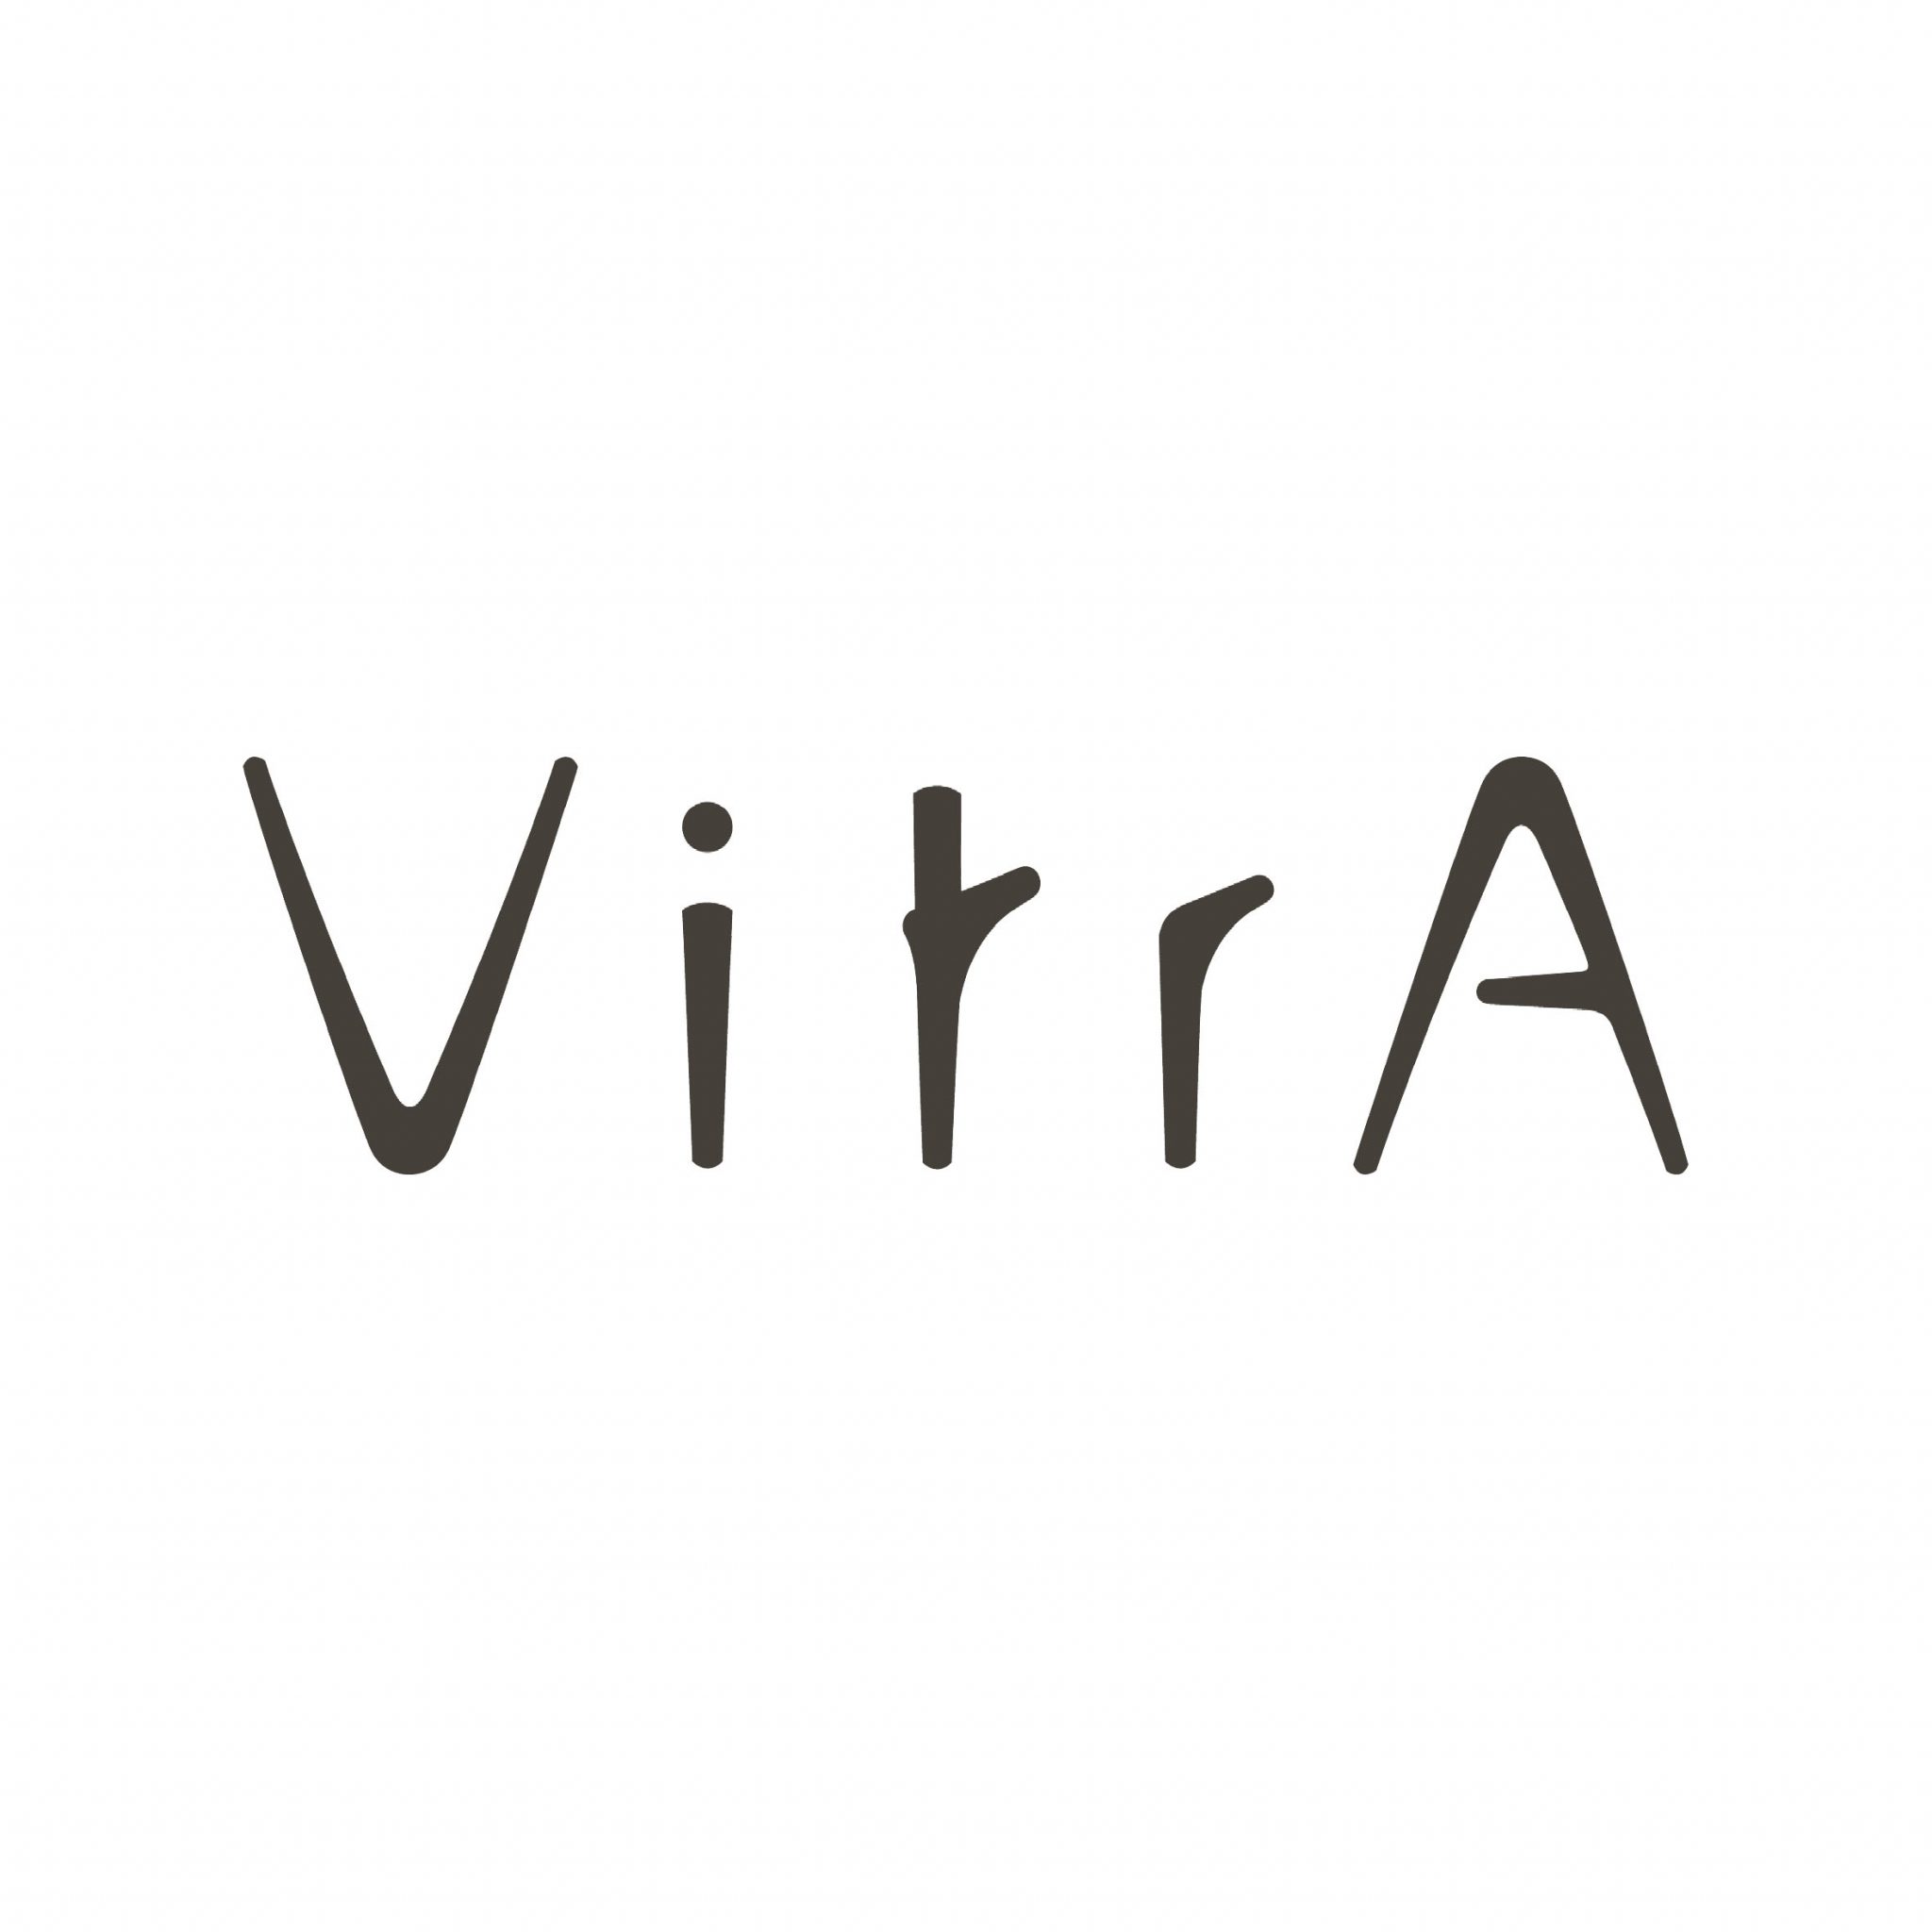 VitrA Bathrooms announces its first RIBA- accredited CPD ‘Bathroom Design and Specification: Ceramic Sanitaryware’ @VitrABathrooms